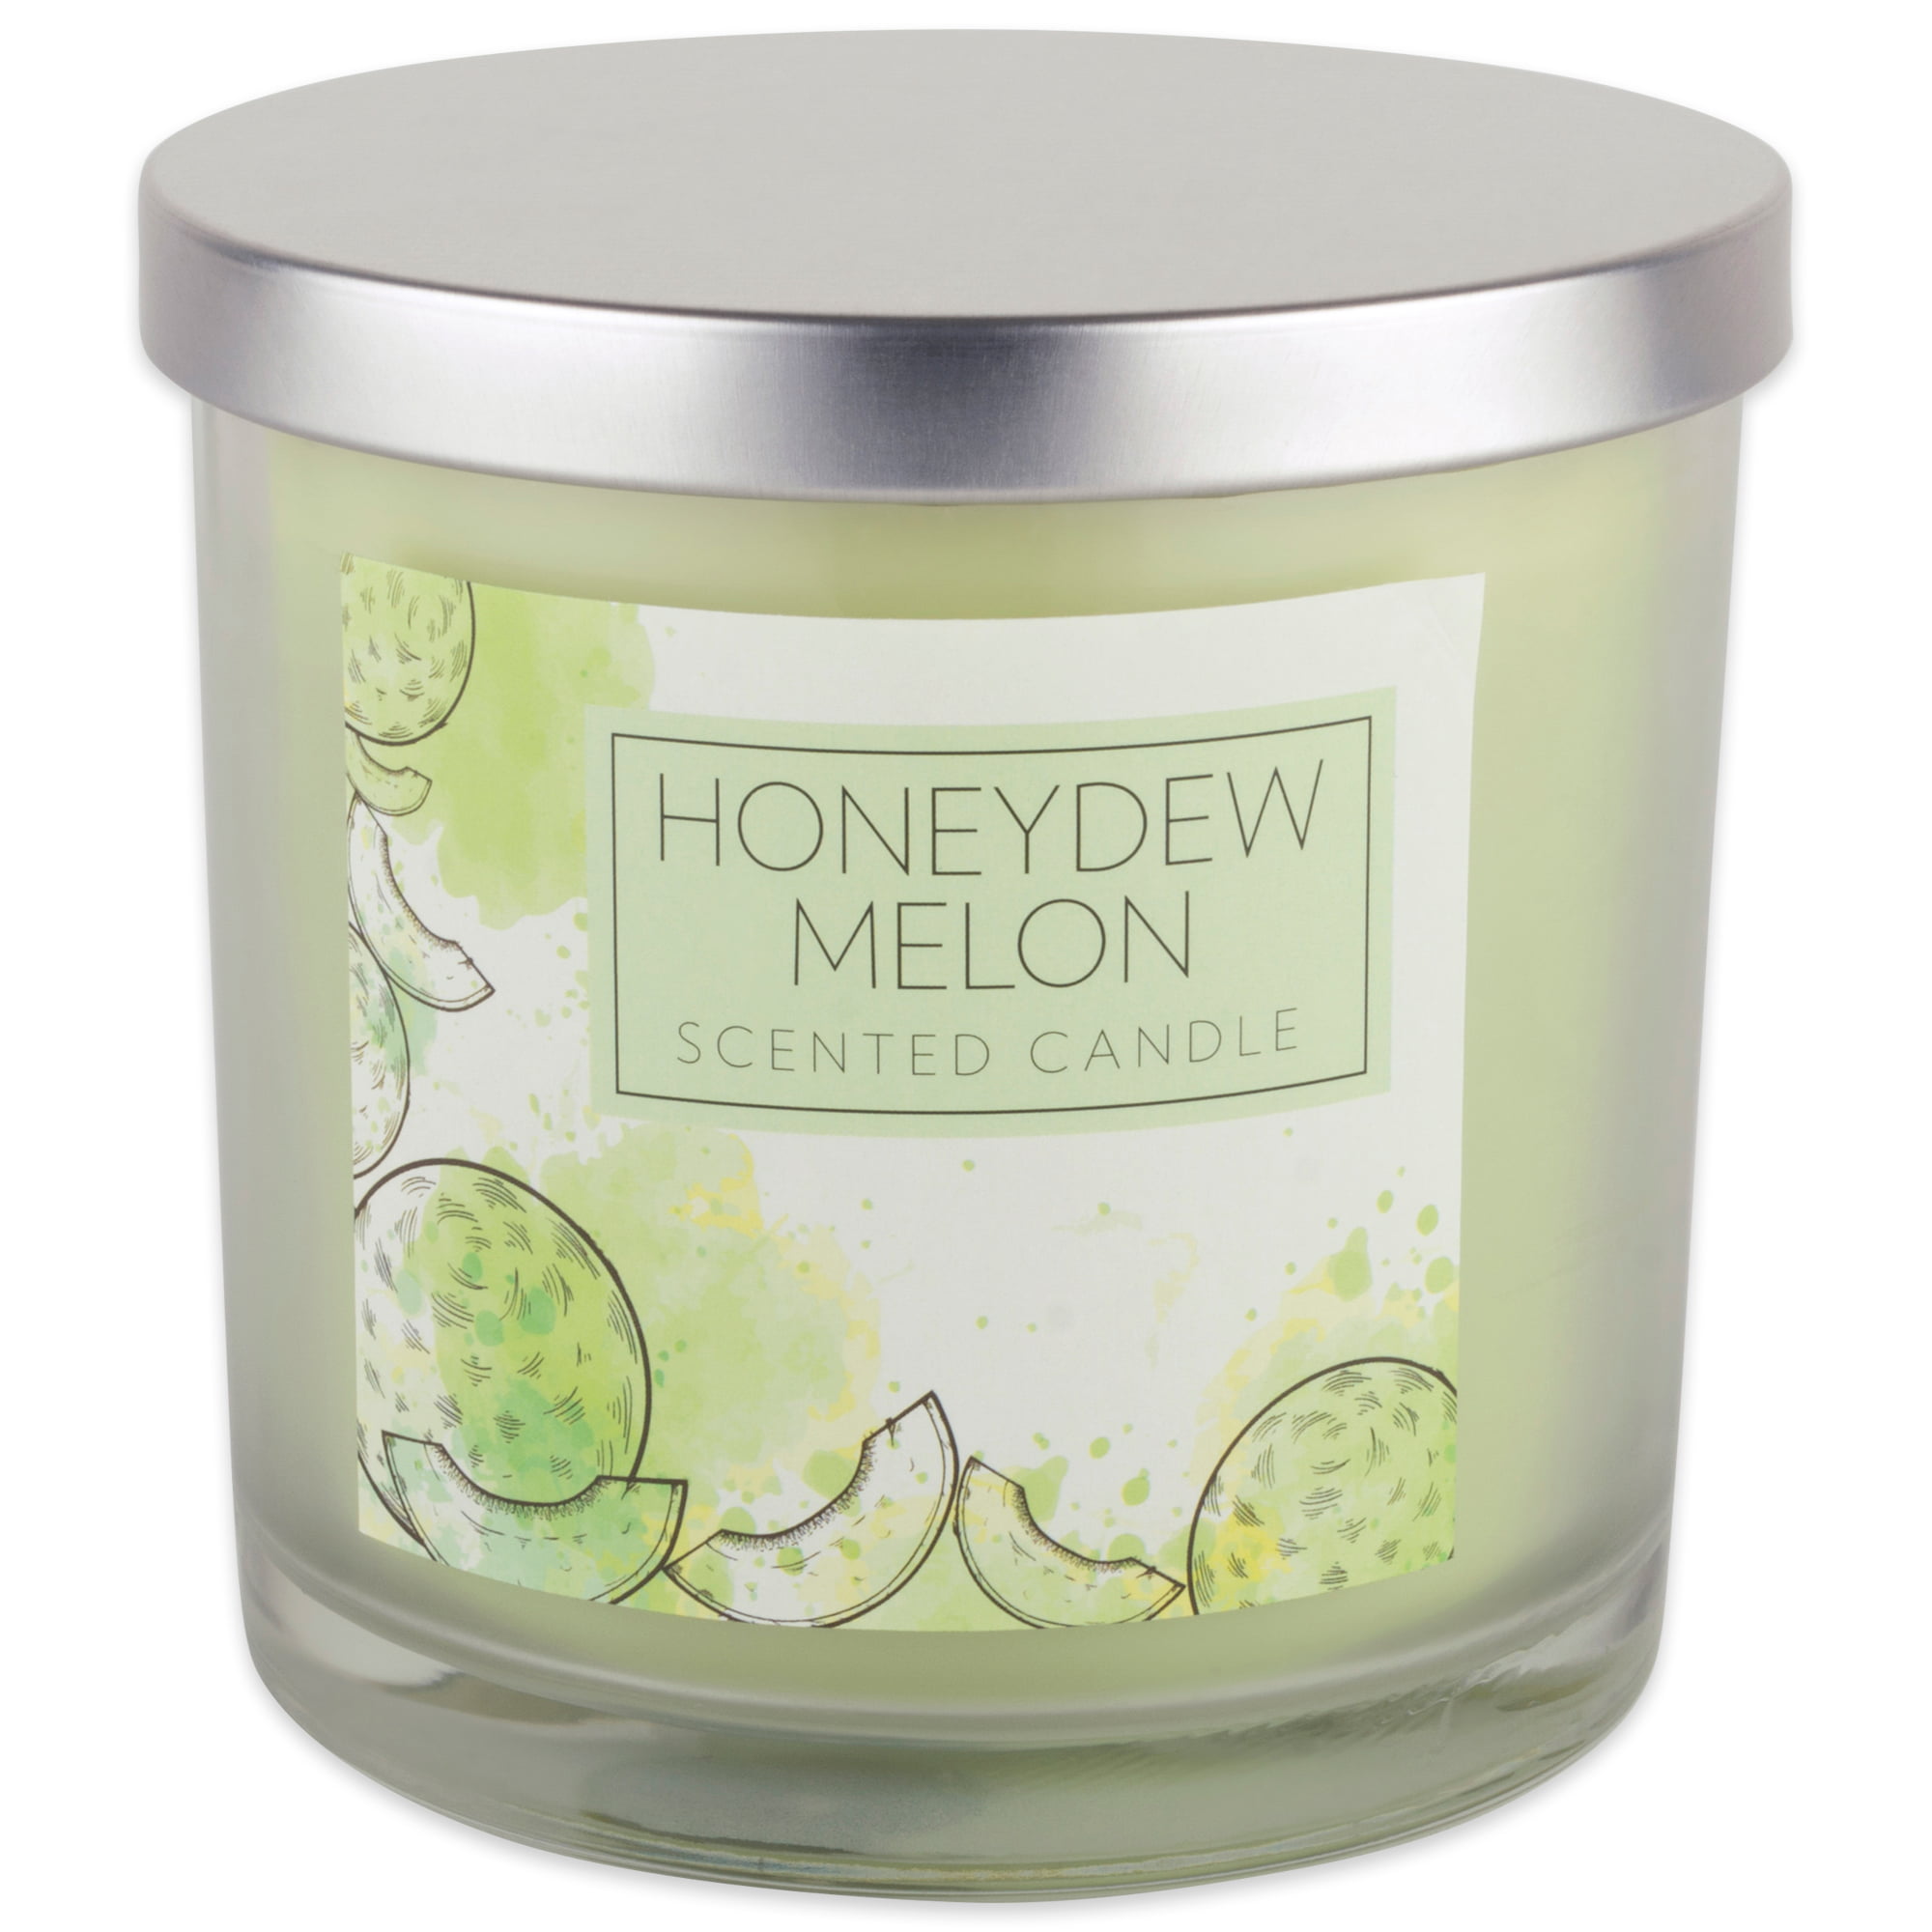 14.5 Oz -Fresh Fruit Scent Hour Burn Time DII Home Traditions 3-Wick Evenly Burning Highly Scented 4x4 Large Jar Candle with 45